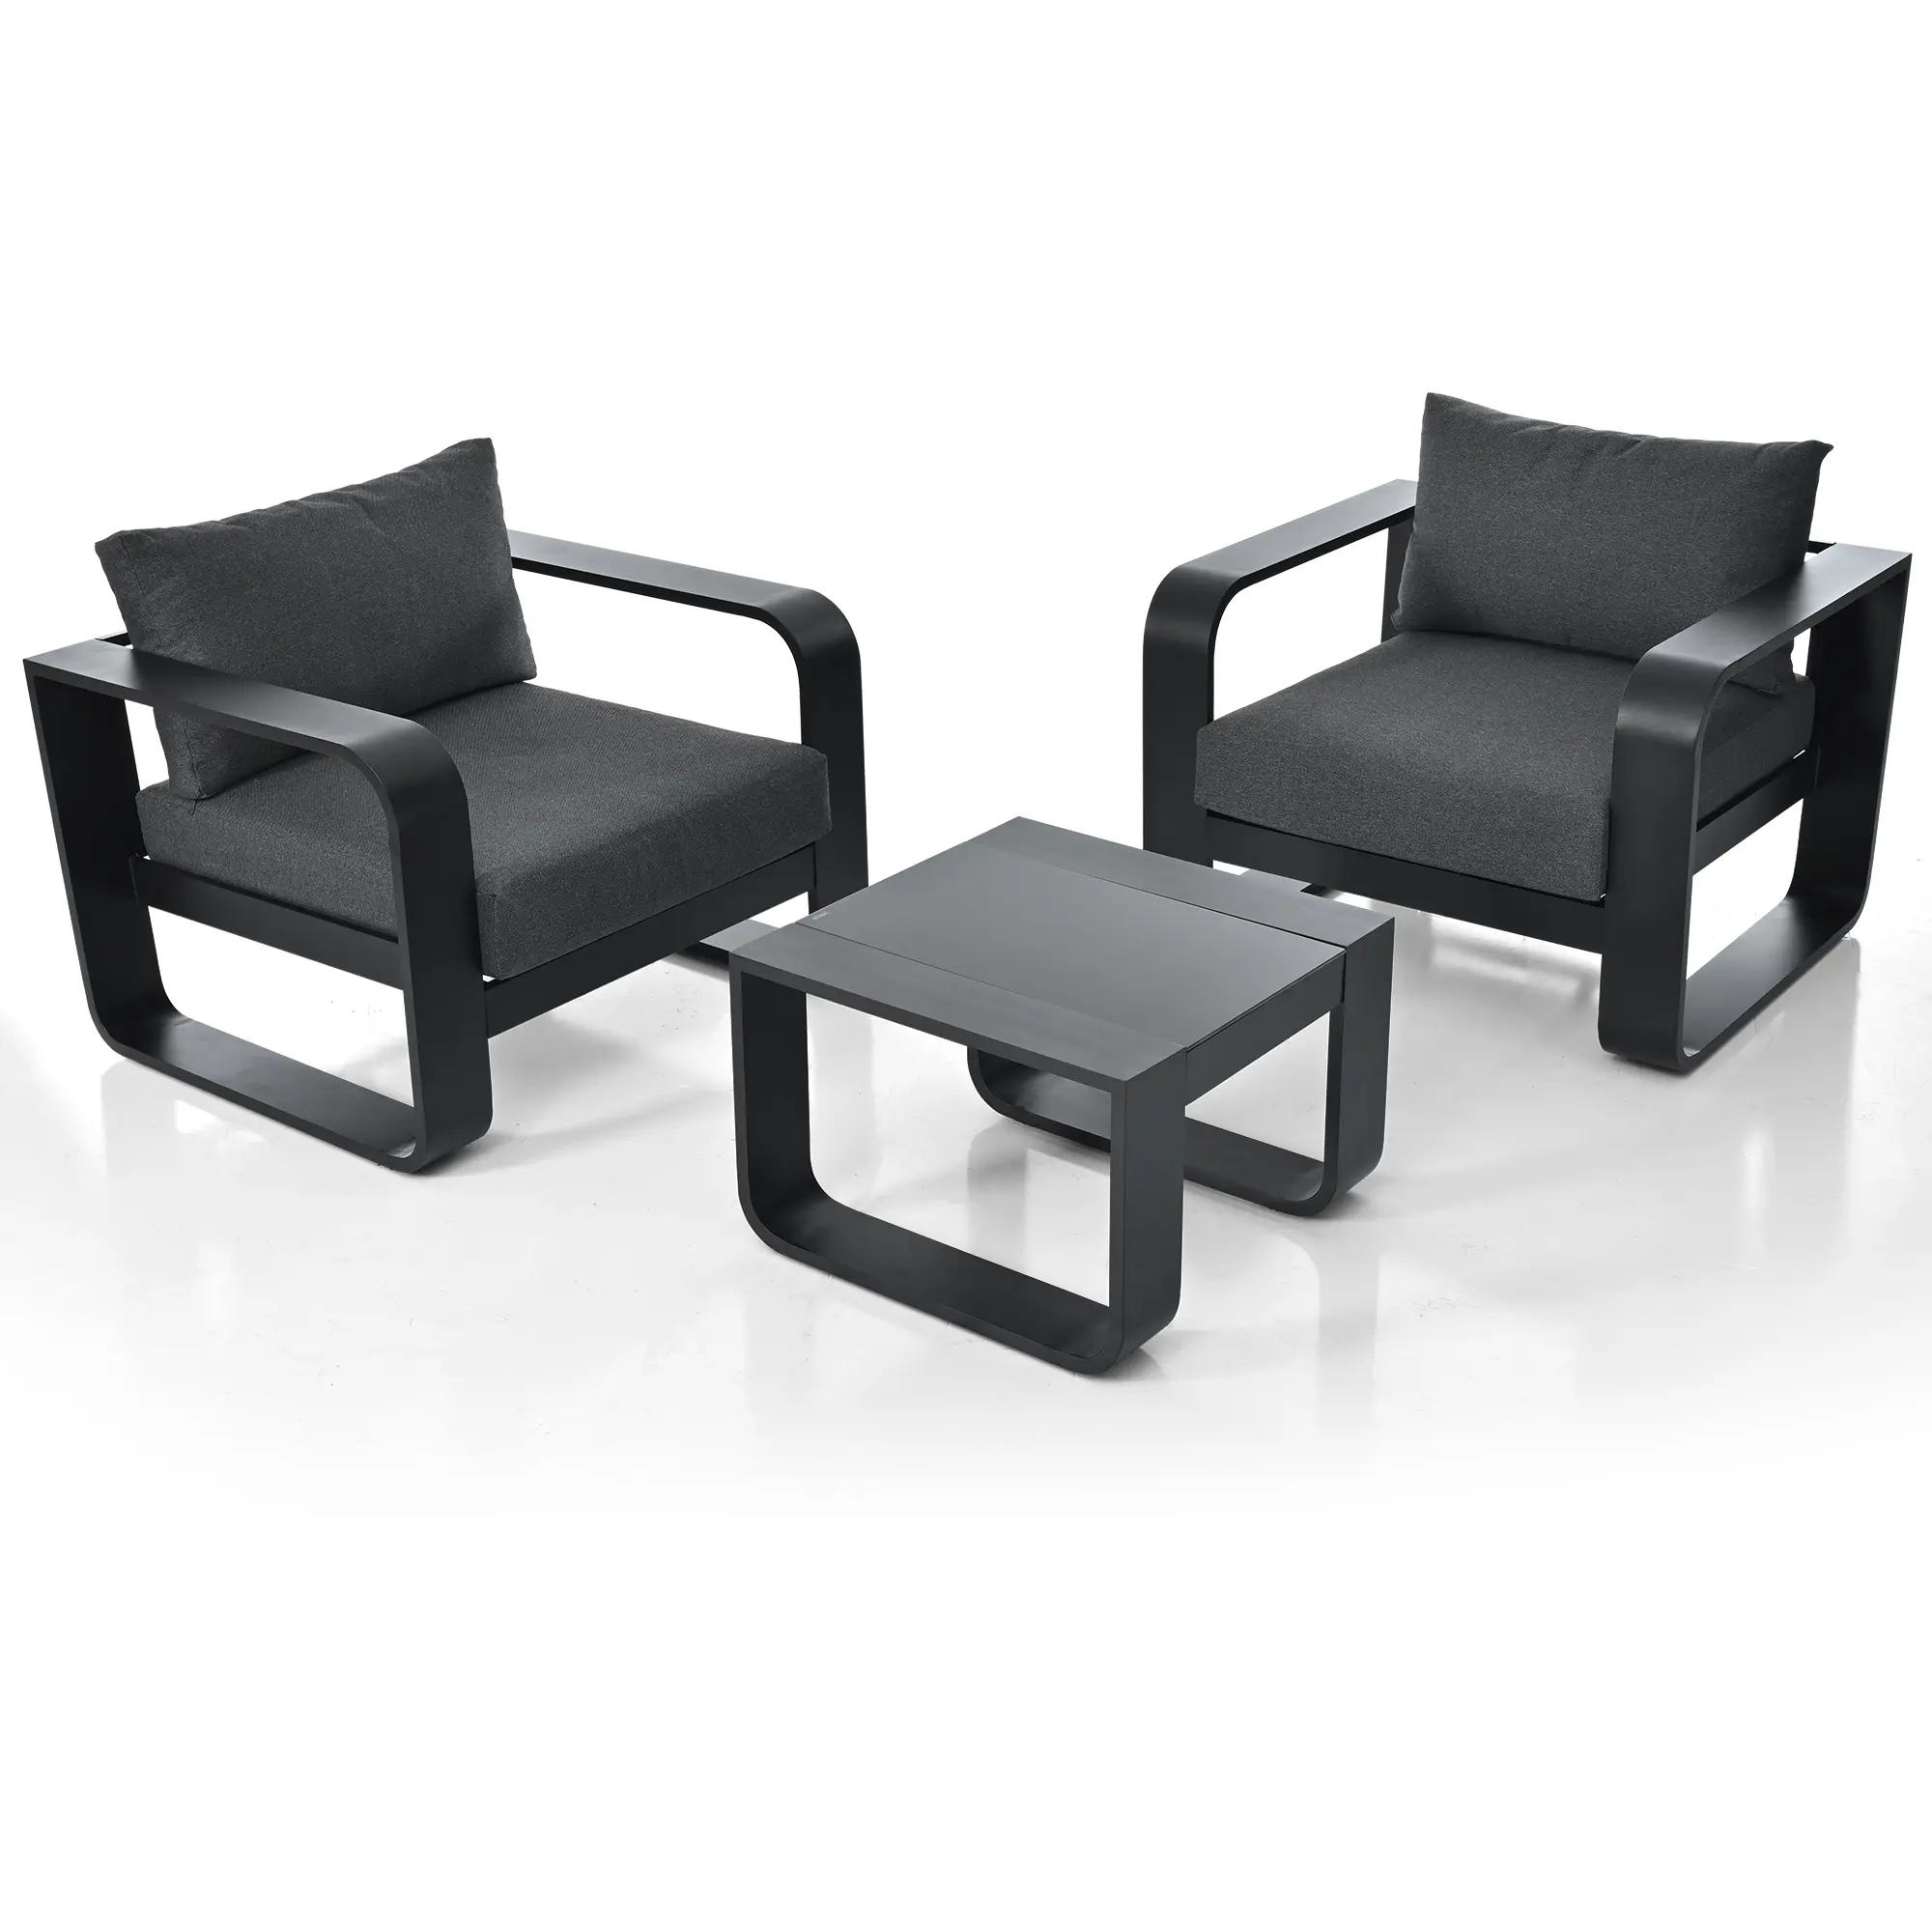 3-pieces Aluminum Frame Patio Furniture Set With 6.7in Thick Cushion And Coffee Table